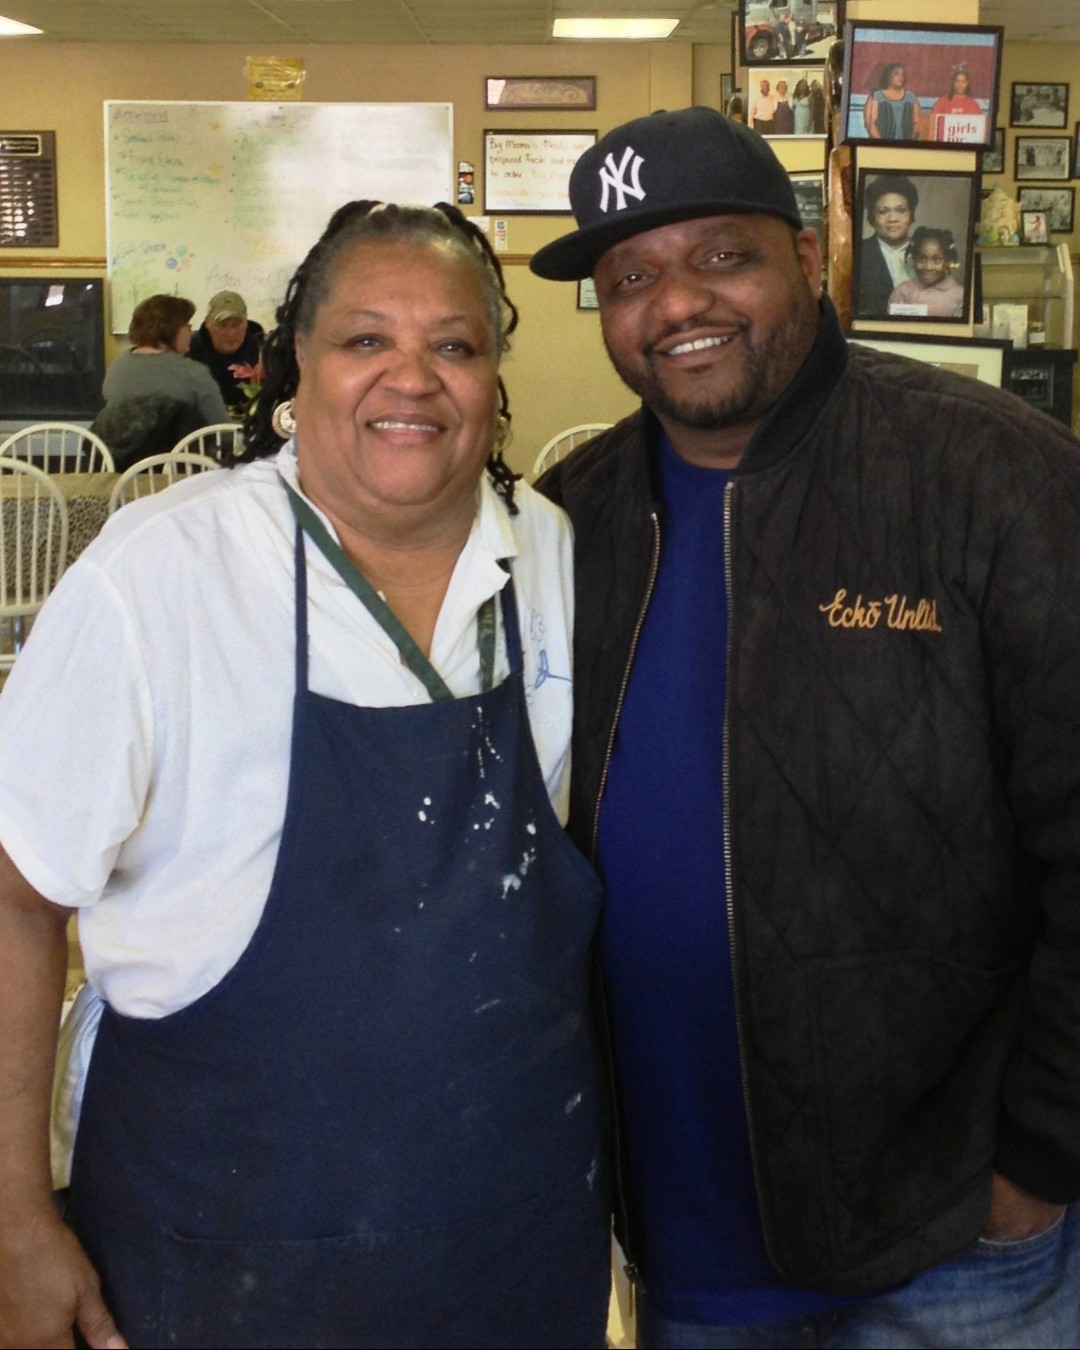 Happy Birthday Aries Spears! We hope to see you the next time your in 